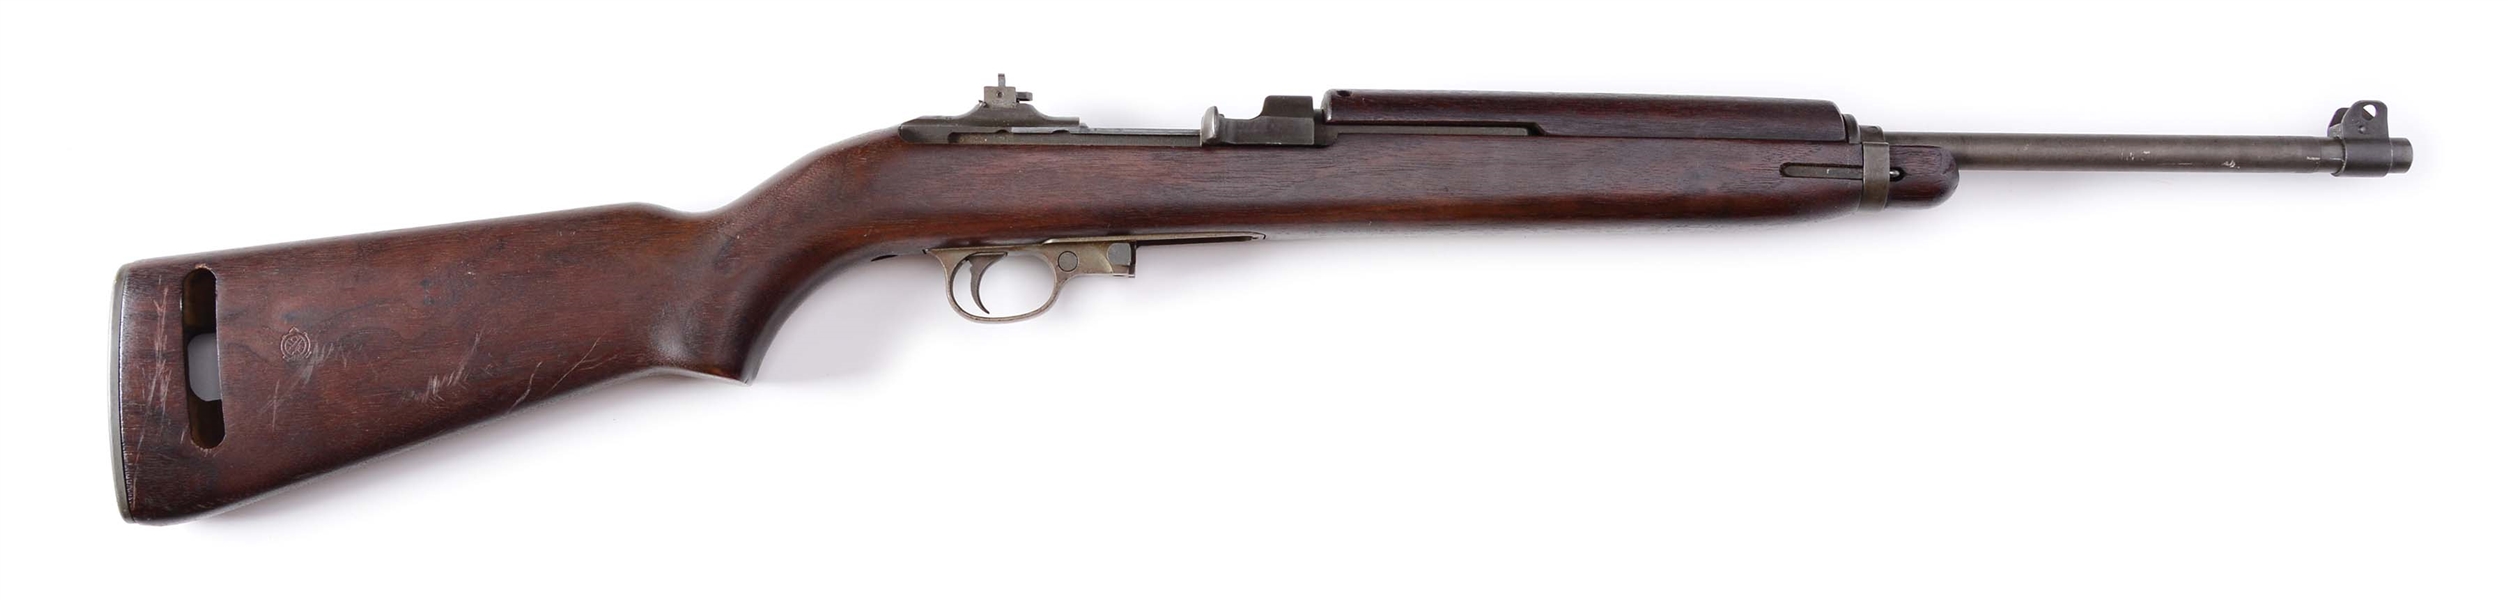 (C) DESIREABLE QUALITY HARDWARE M1 CARBINE MID-WAR PRODUCTION IN PRIME COLLECTORS CONDITION.